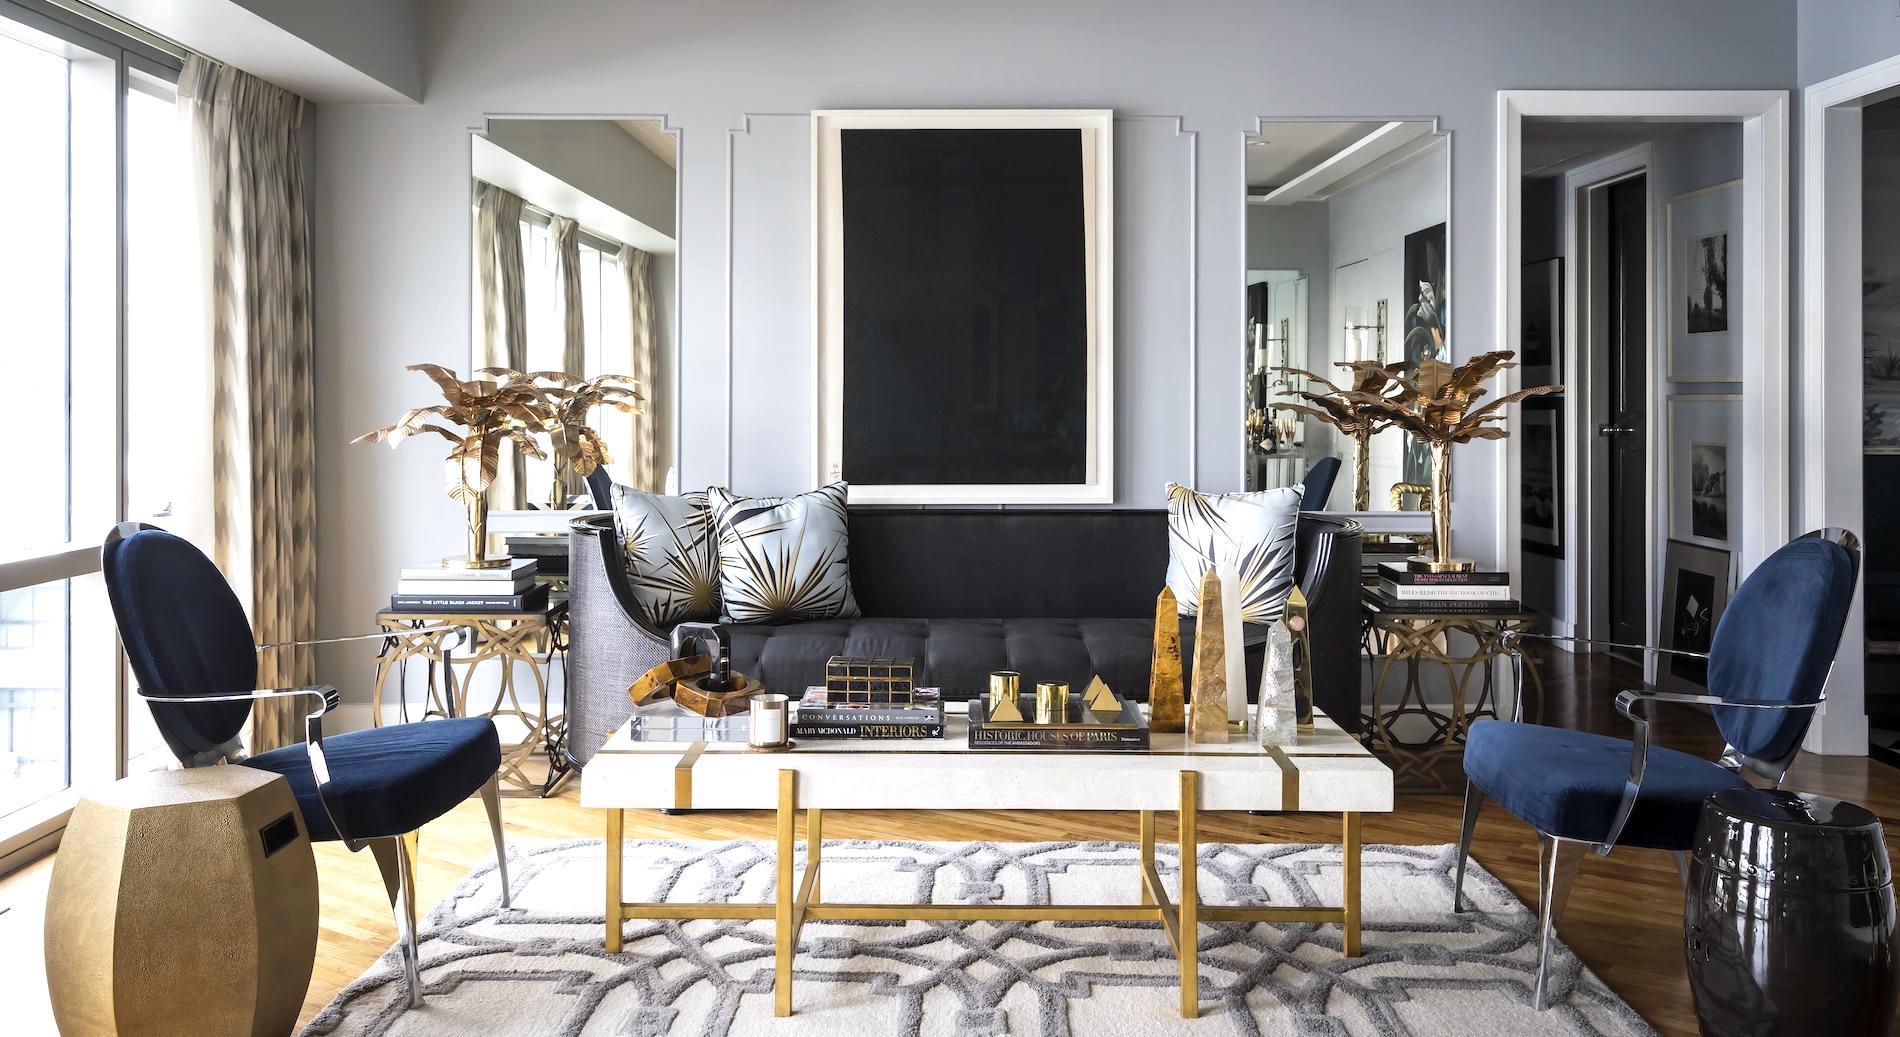 An Insiders' Guide to Choosing the Perfect Interior Designer